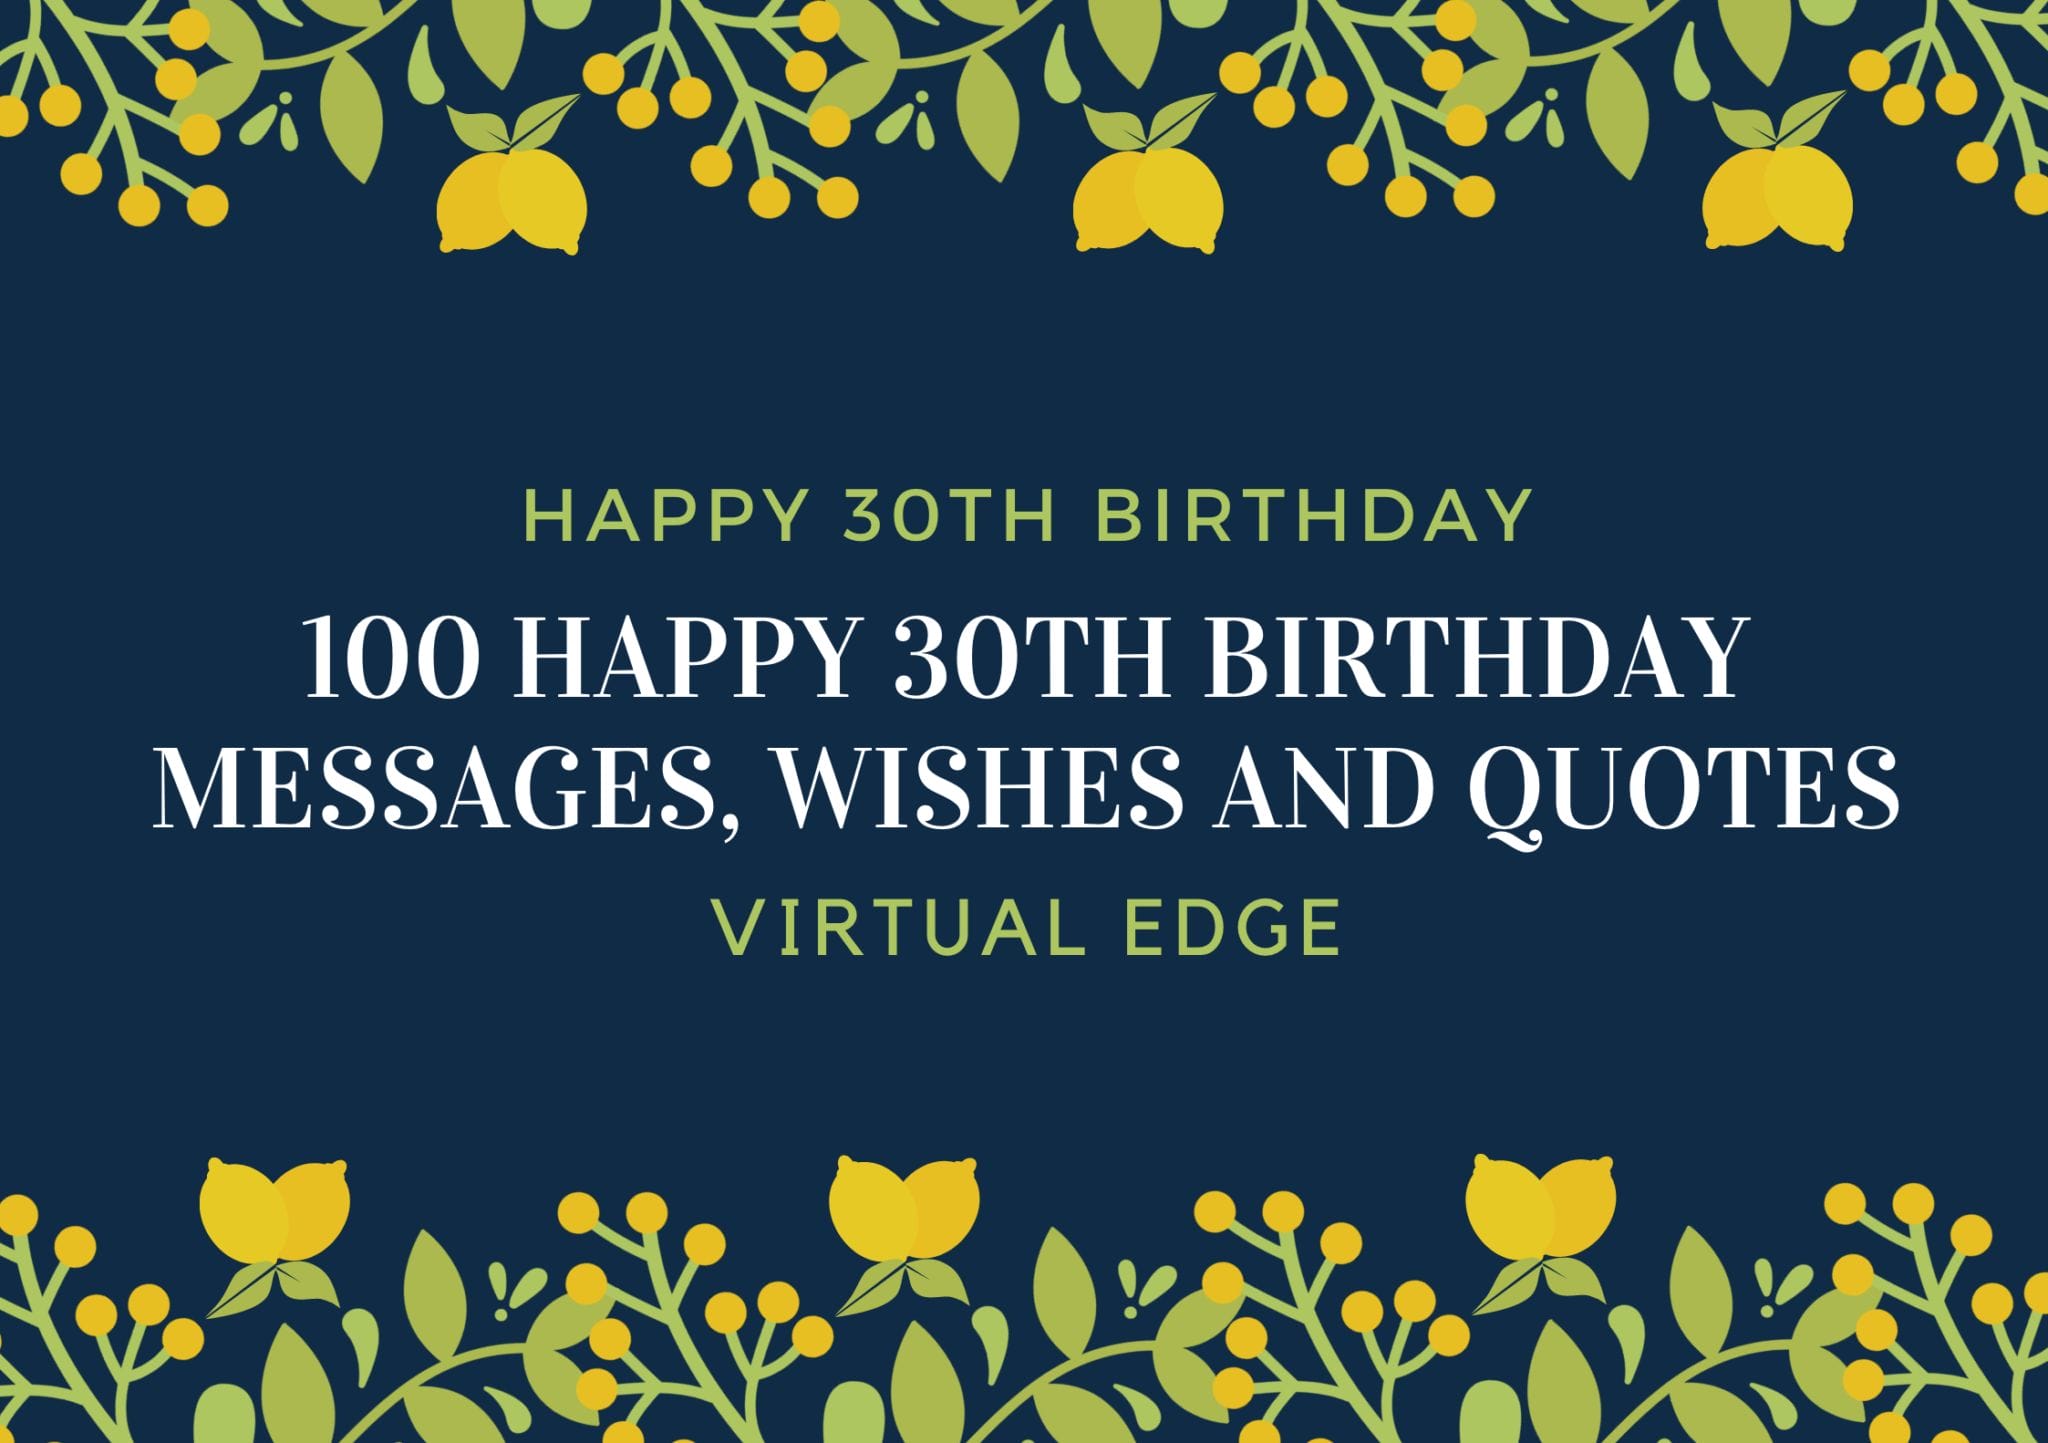 130-happy-30th-birthday-messages-wishes-and-quotes-virtual-edge